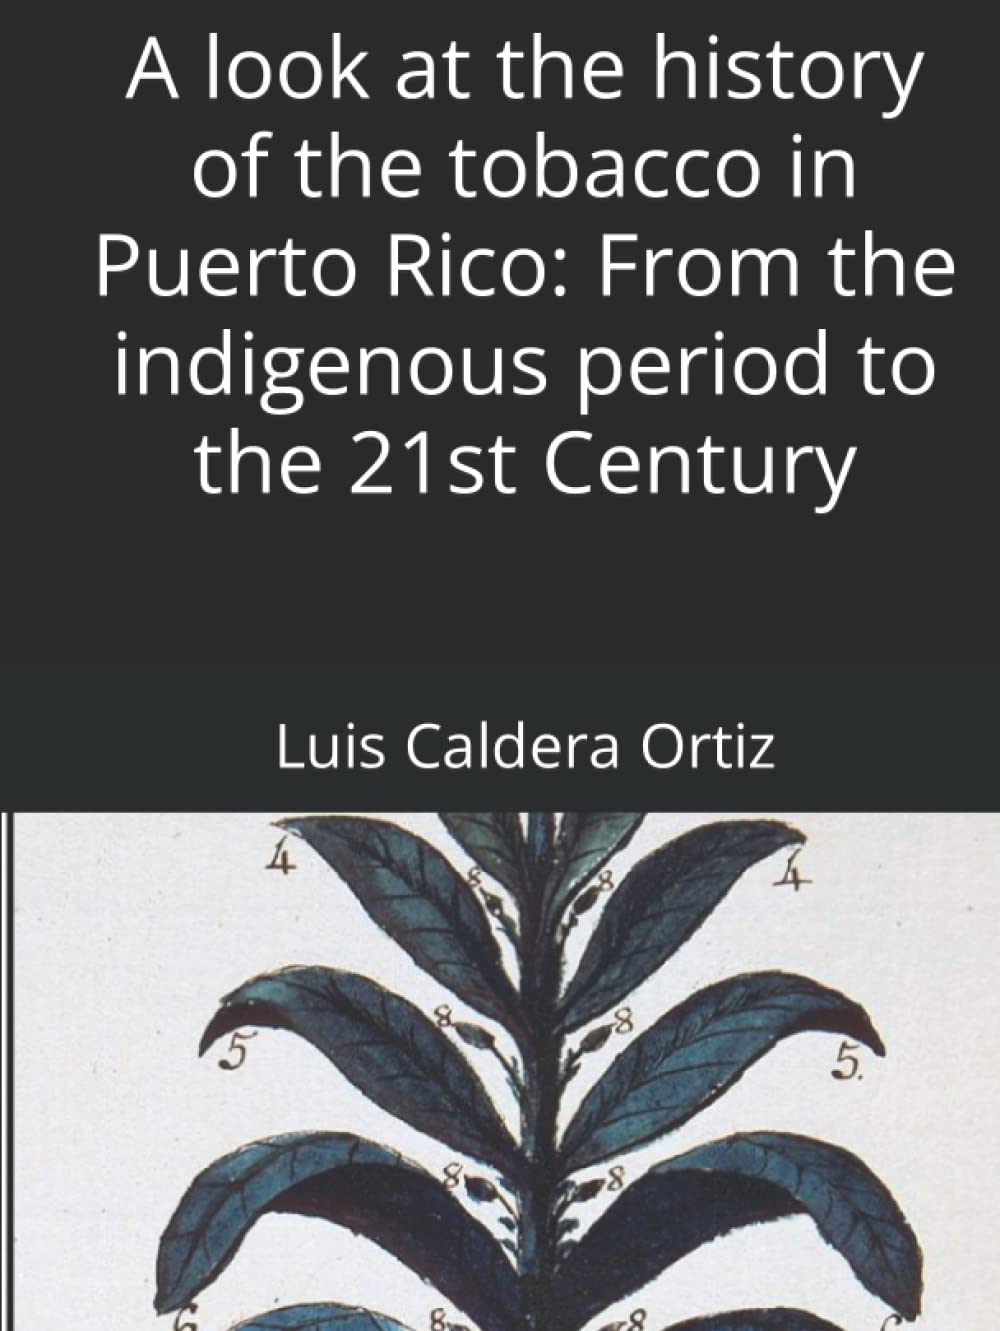 A LOOK AT THE HISTORY OF THE TOBACCO IN PUERTO RICO: FROM THE INDIGENOUS PERIOD TO THE 21ST CENTURY - Luis Caldera Ortiz